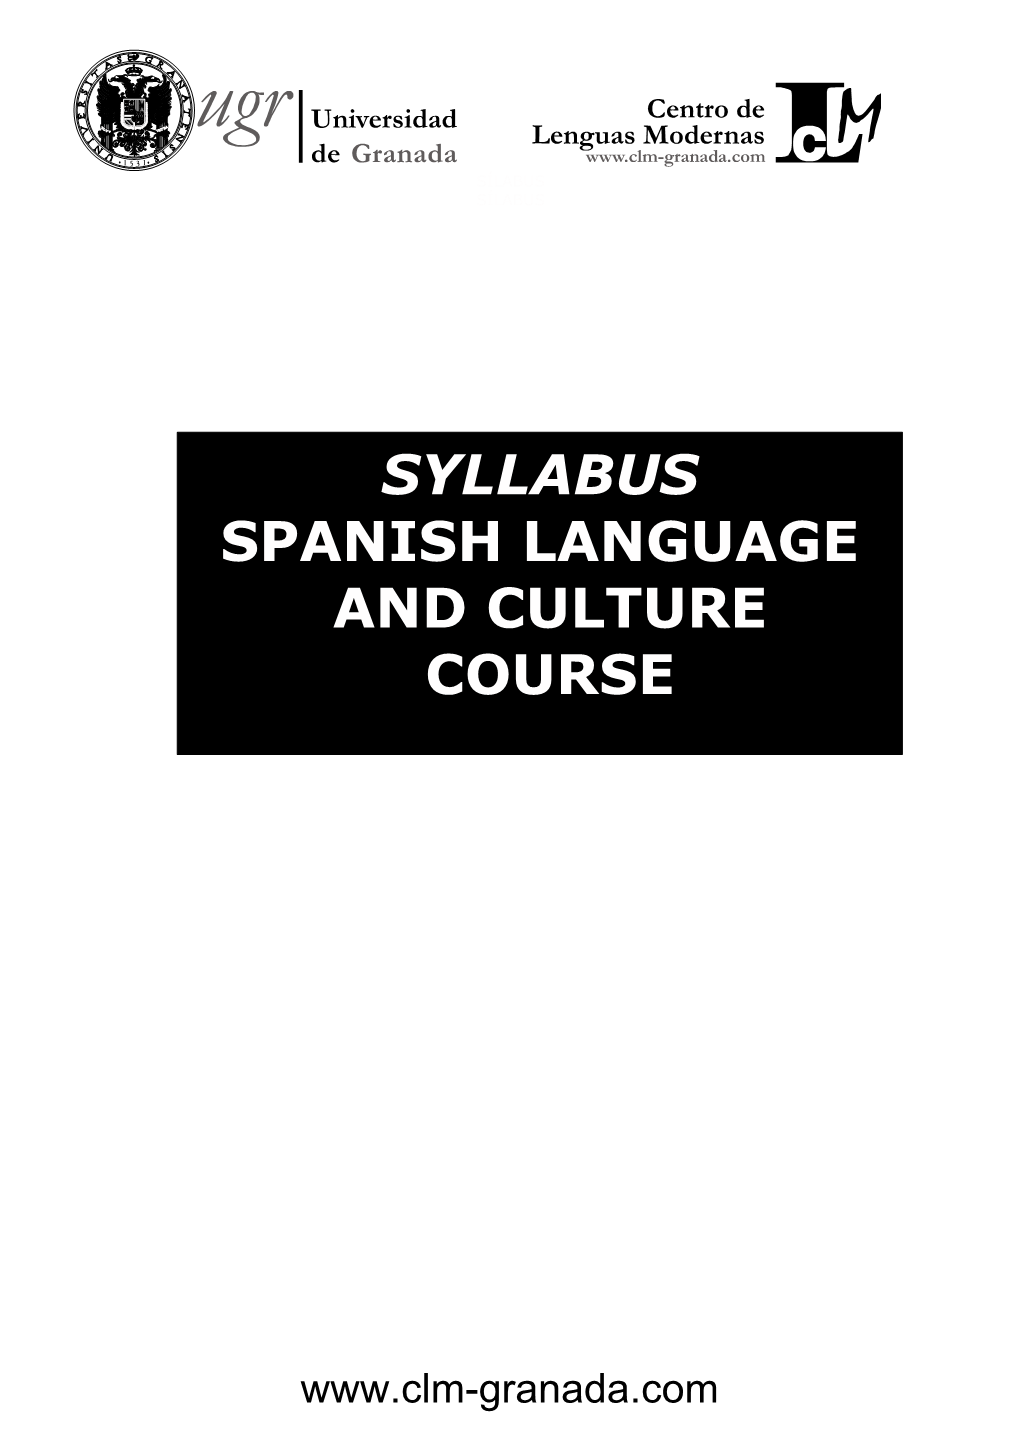 Syllabus Spanish Language and Culture Course